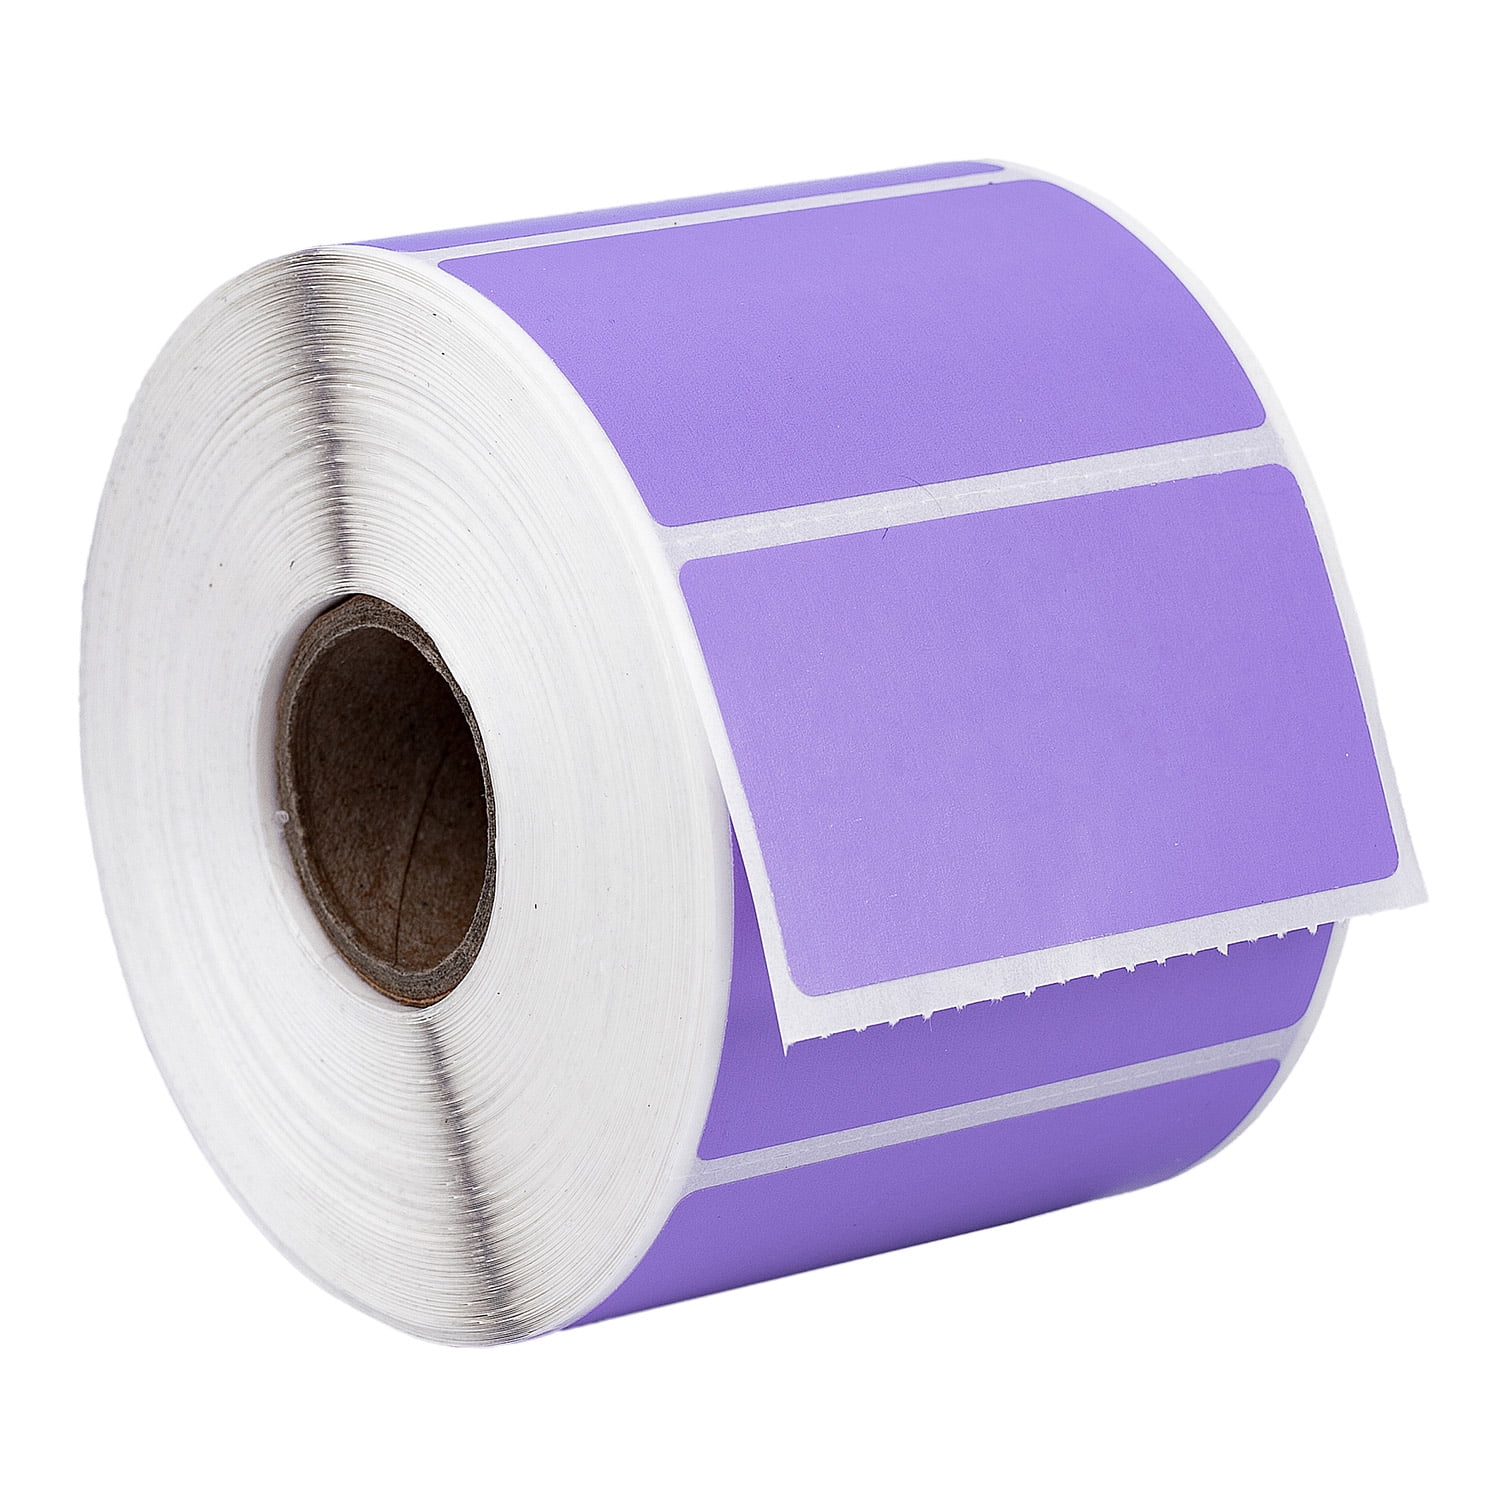 High quality Direct Thermal Labels 1 x 2.6  Roll Satisfaction Guaranteed 